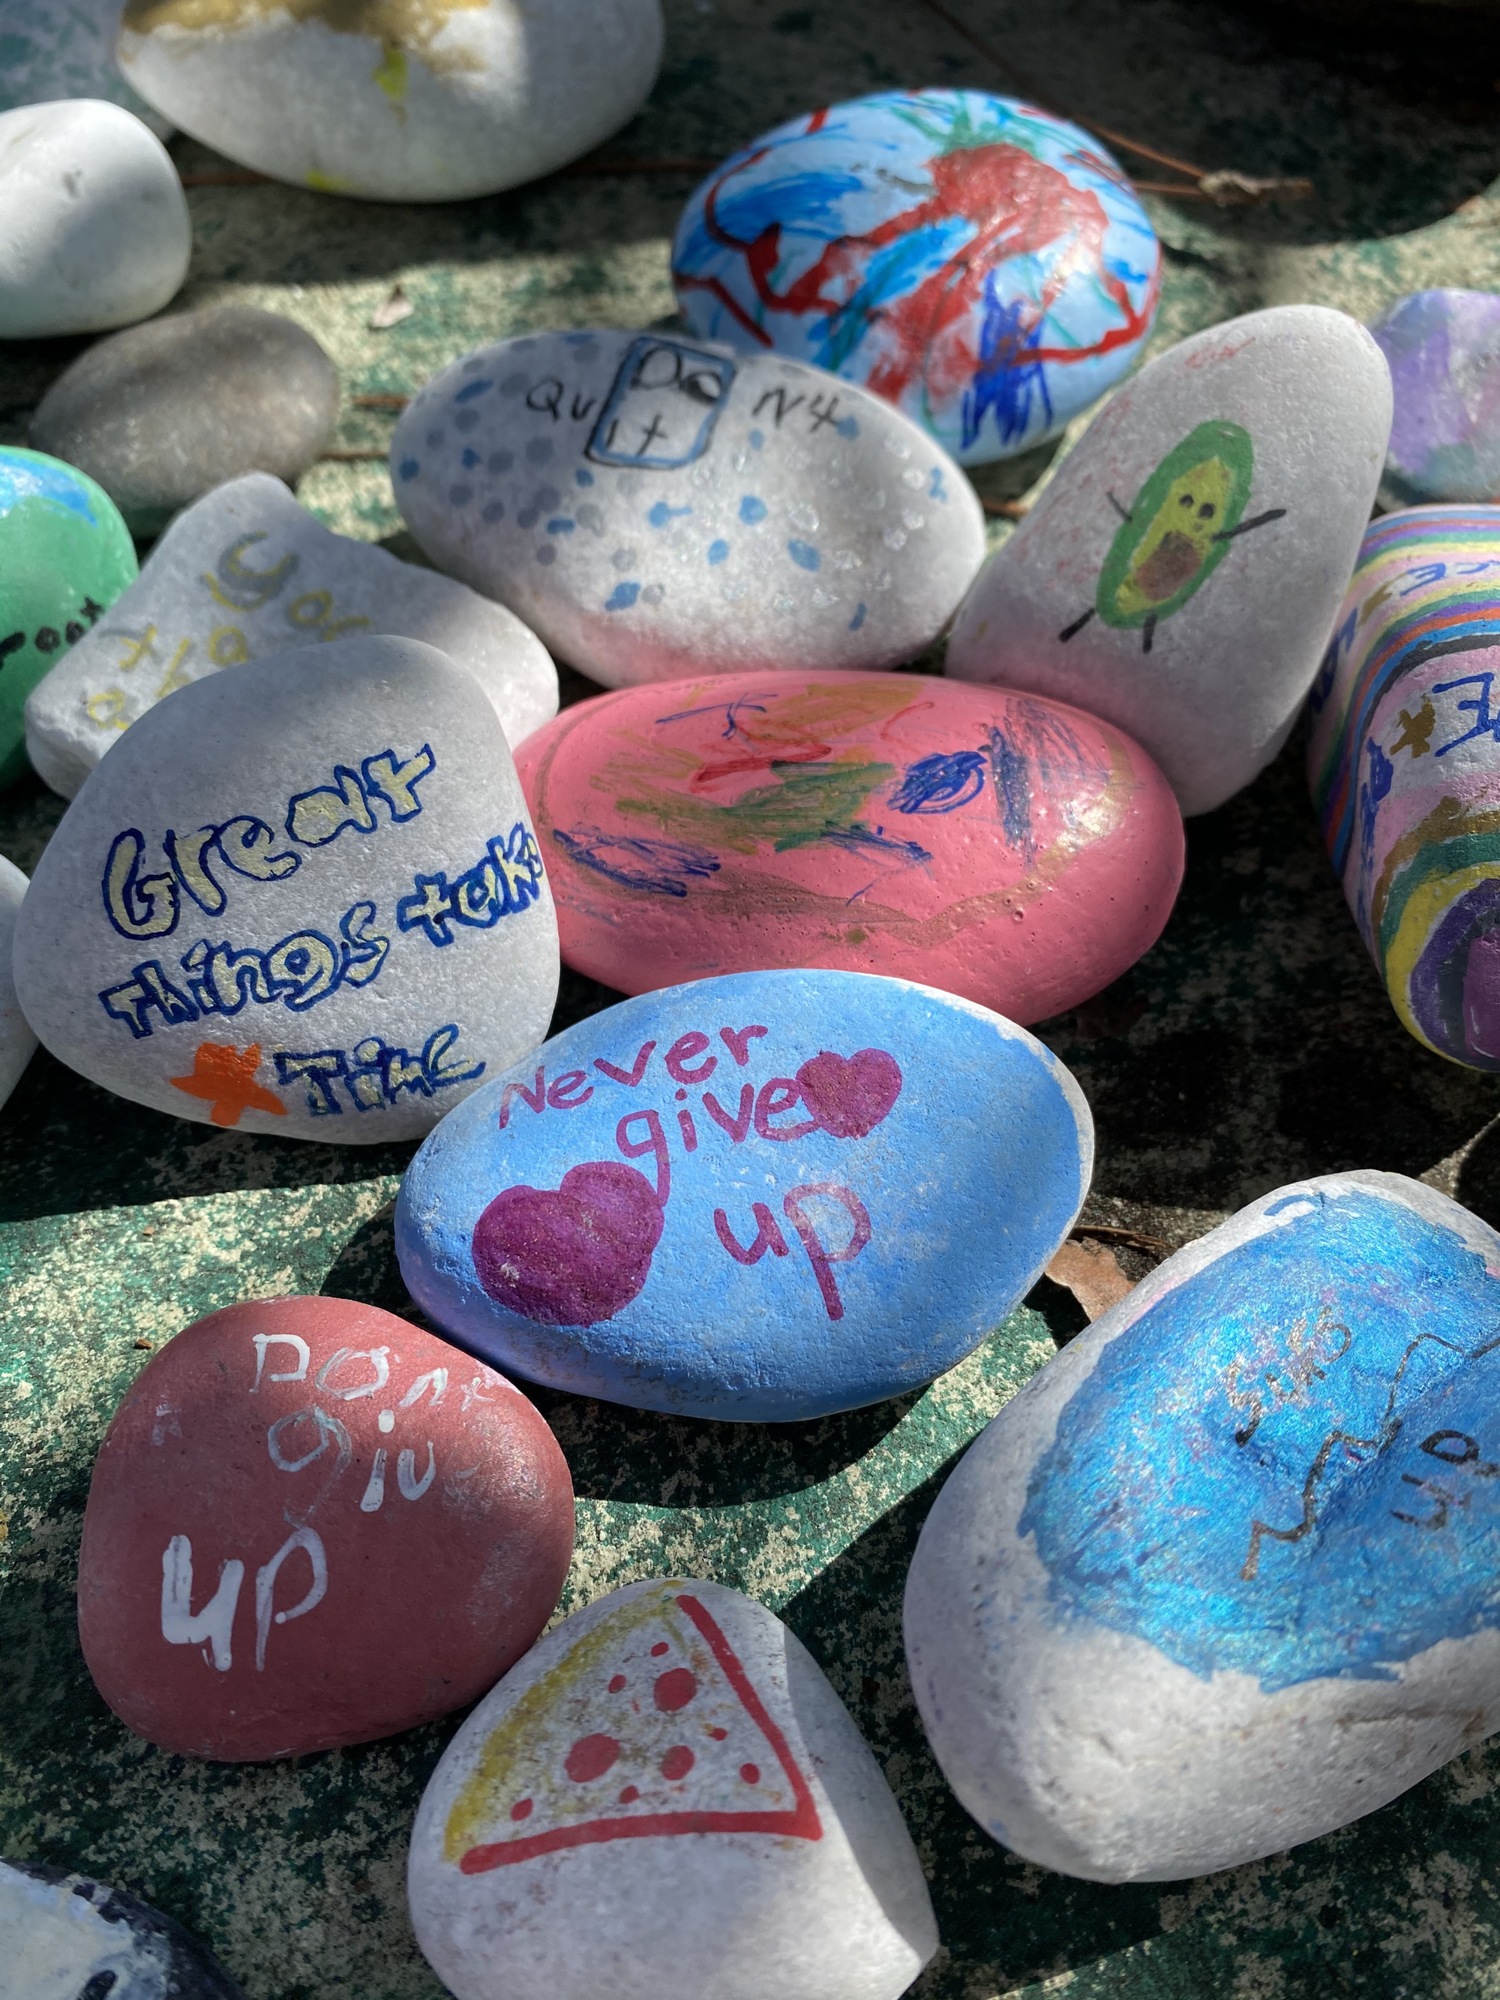 Some of the rocks have positive messages on them while others have pictures painted on them. Courtesy photo.